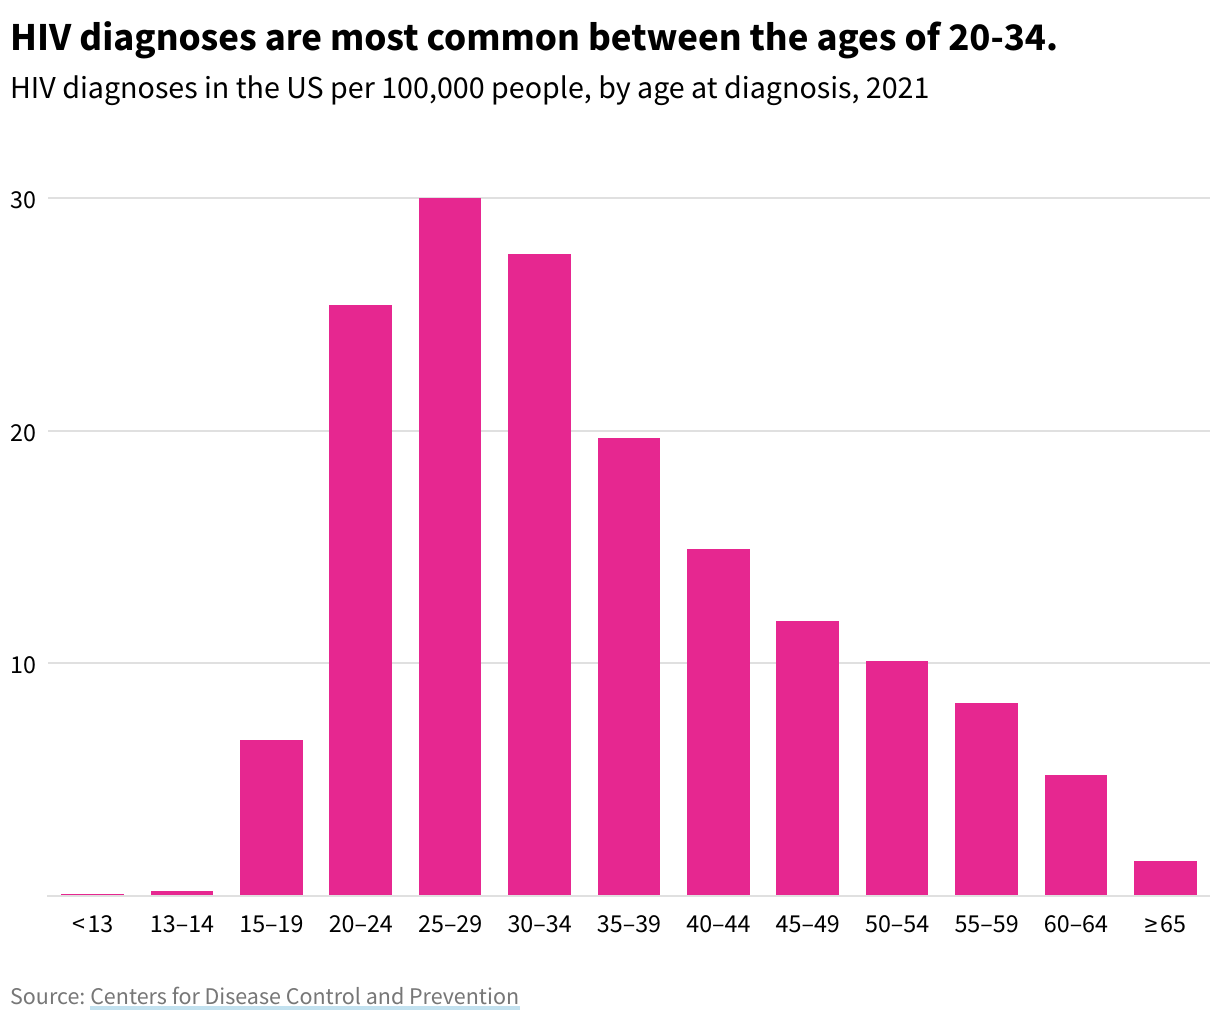 Bar graph showing HIV diagnoses by age group. HIV diagnoses are most common between the ages of 20-34. 